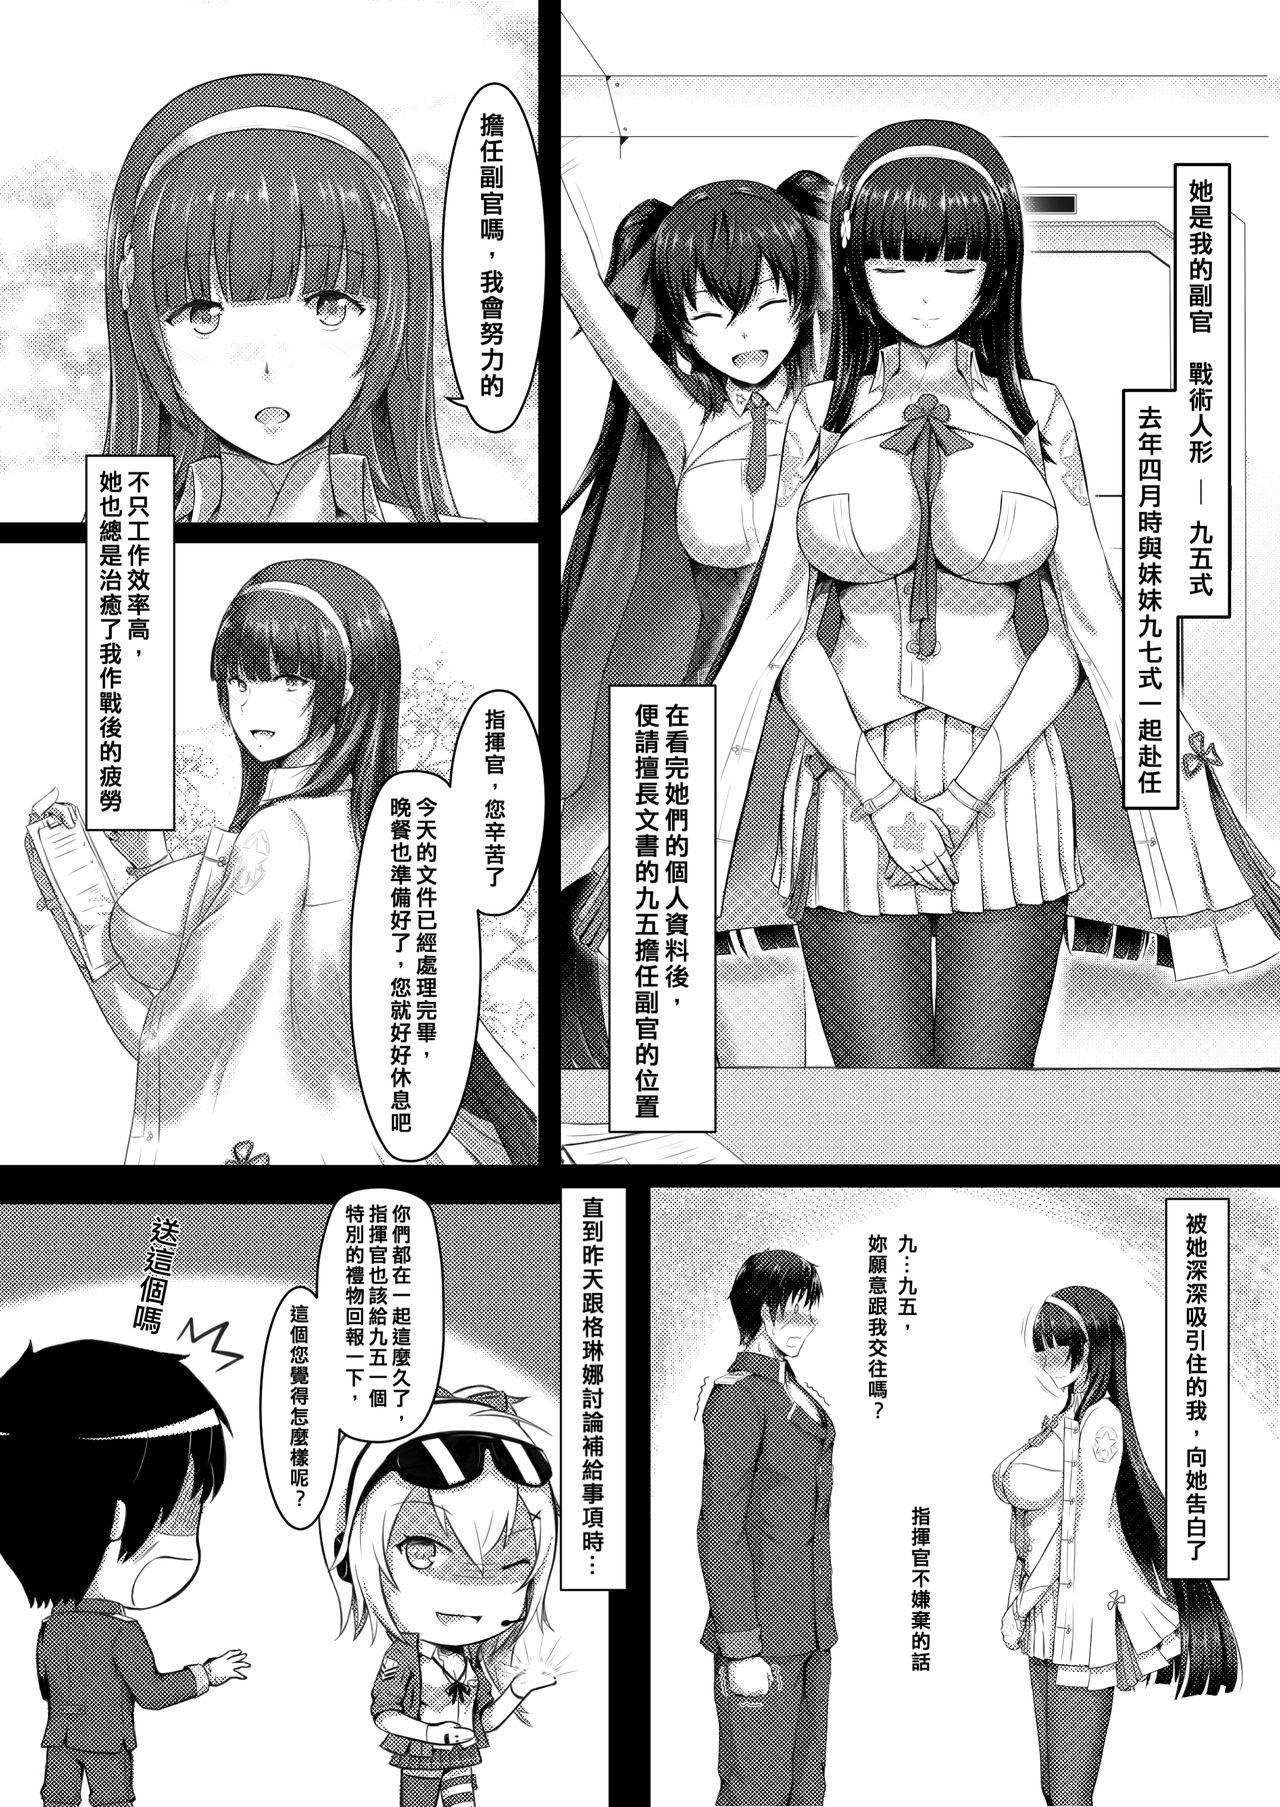 Officesex Xihuazhili - Girls frontline Eating - Page 3